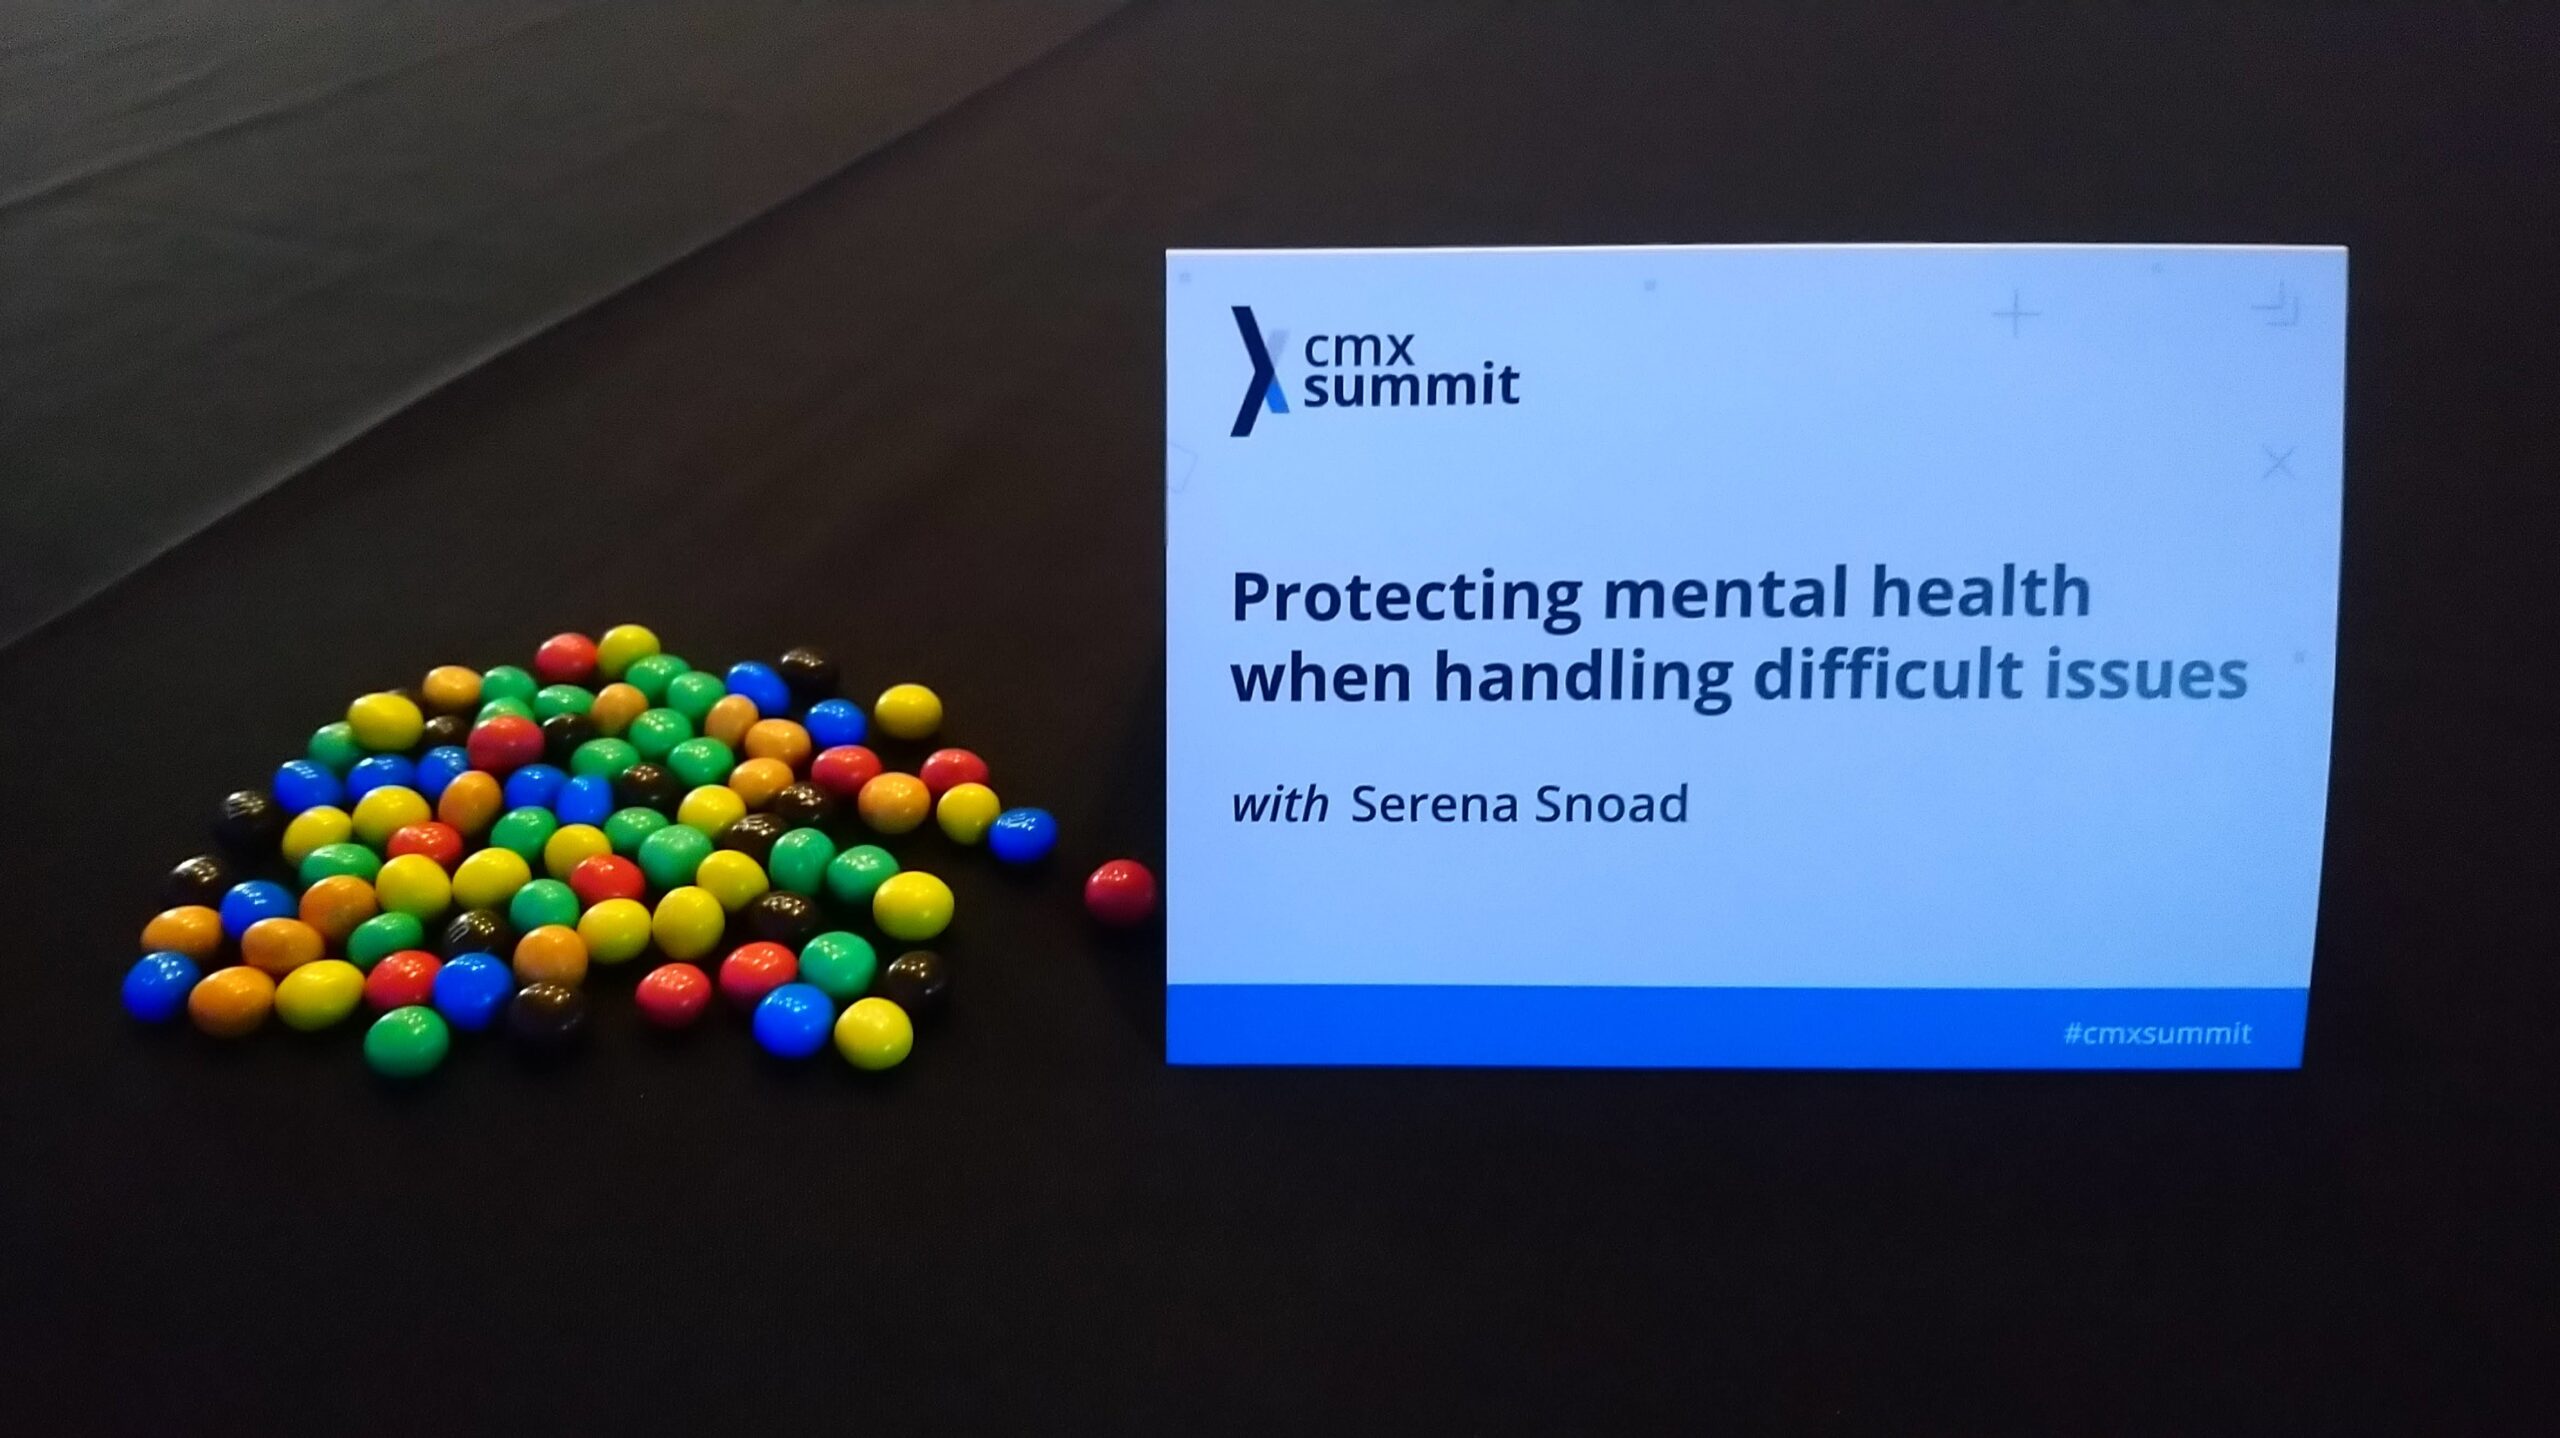 Serena Snoad speaks on protecting mental health for community professionals at CMX summit 2019